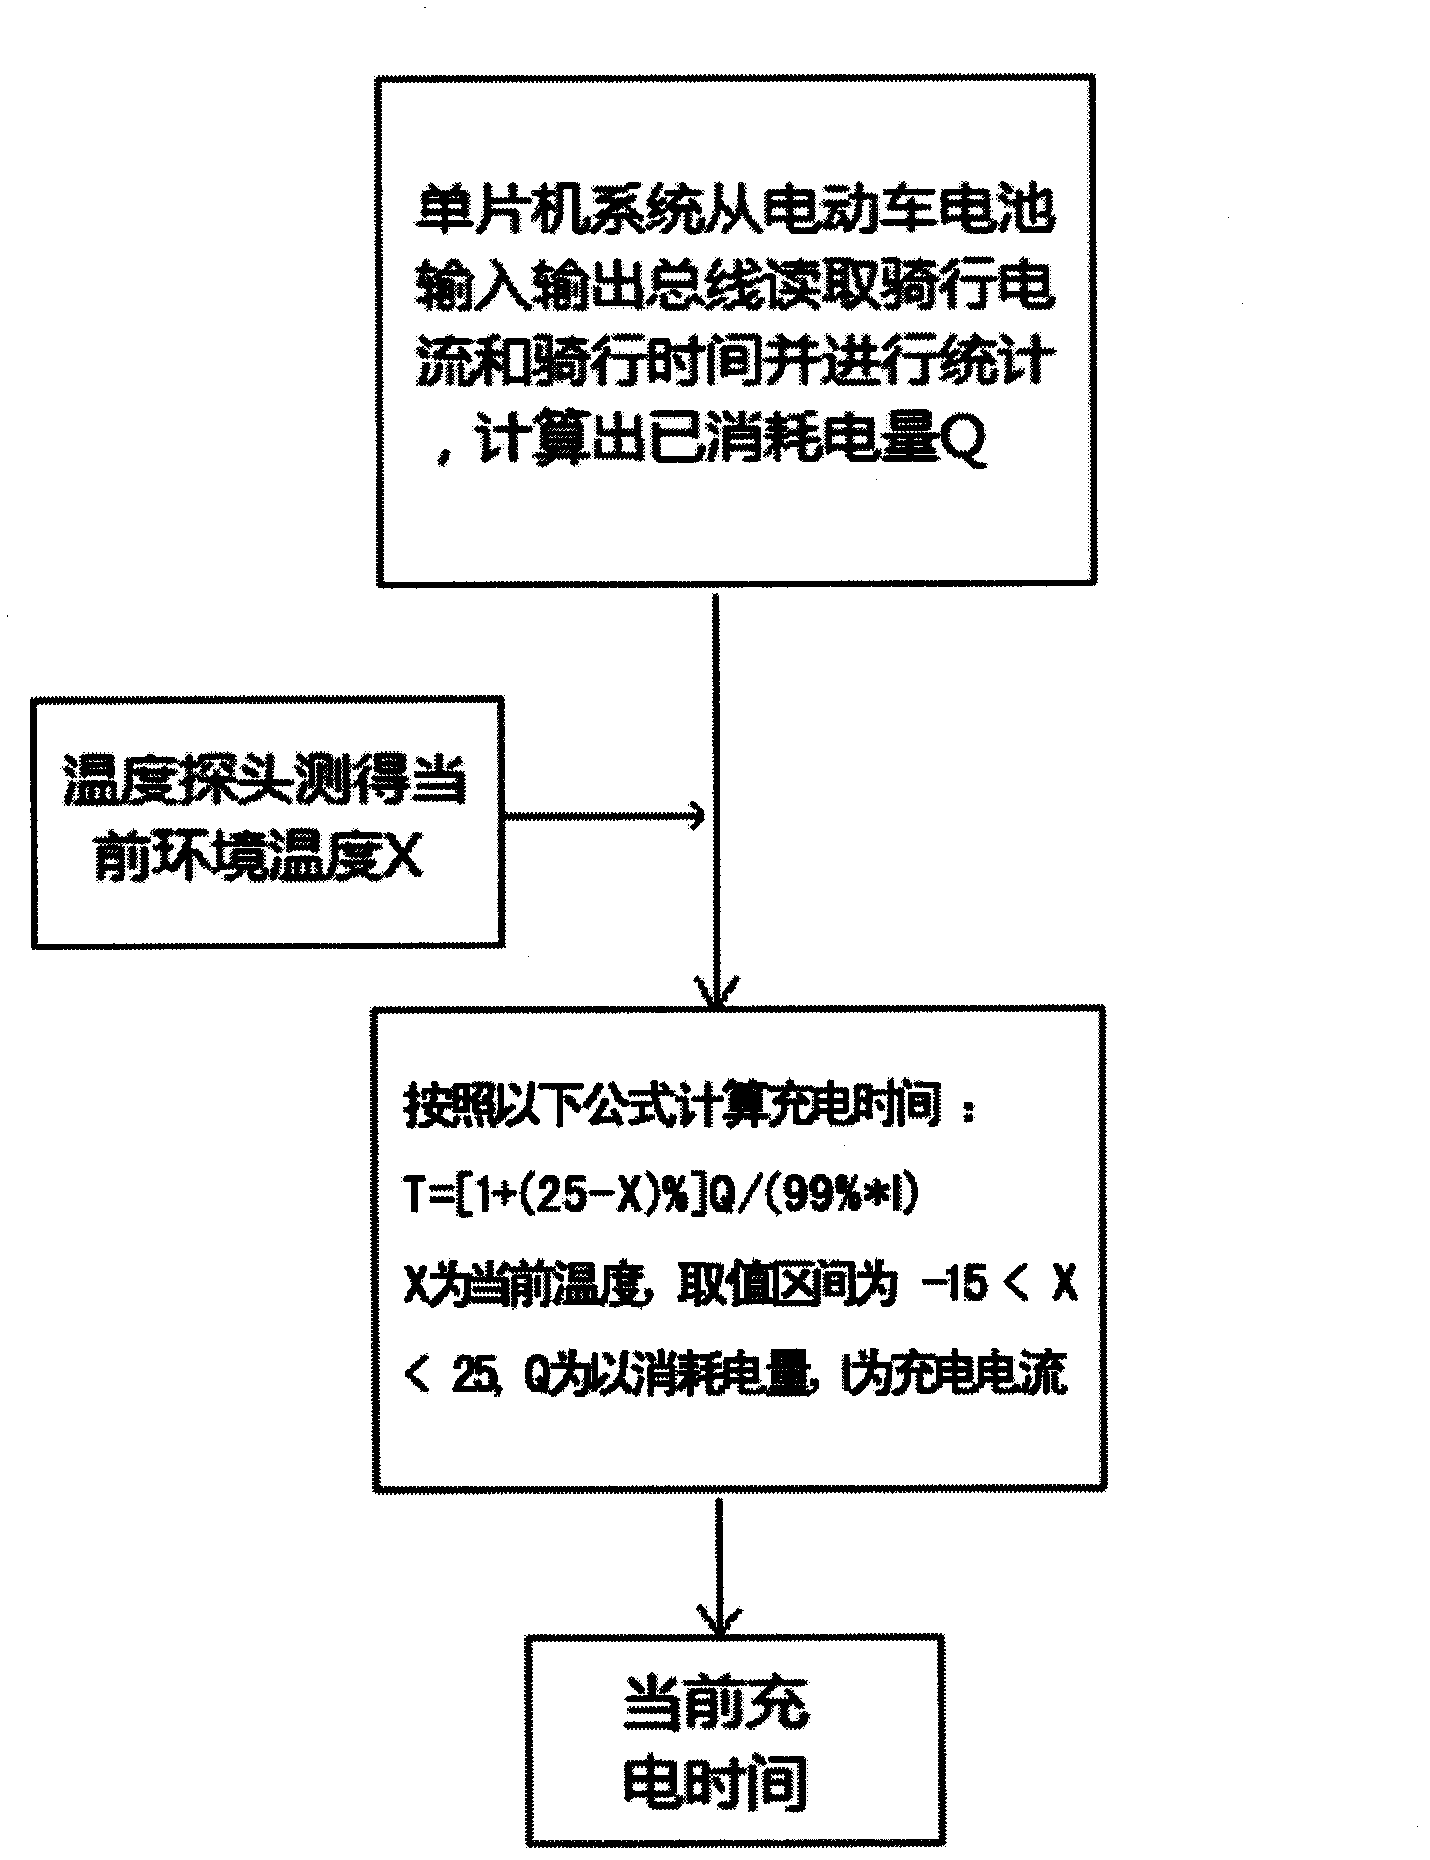 Automatic time-control charging method and intelligent charging device of electric bicycle